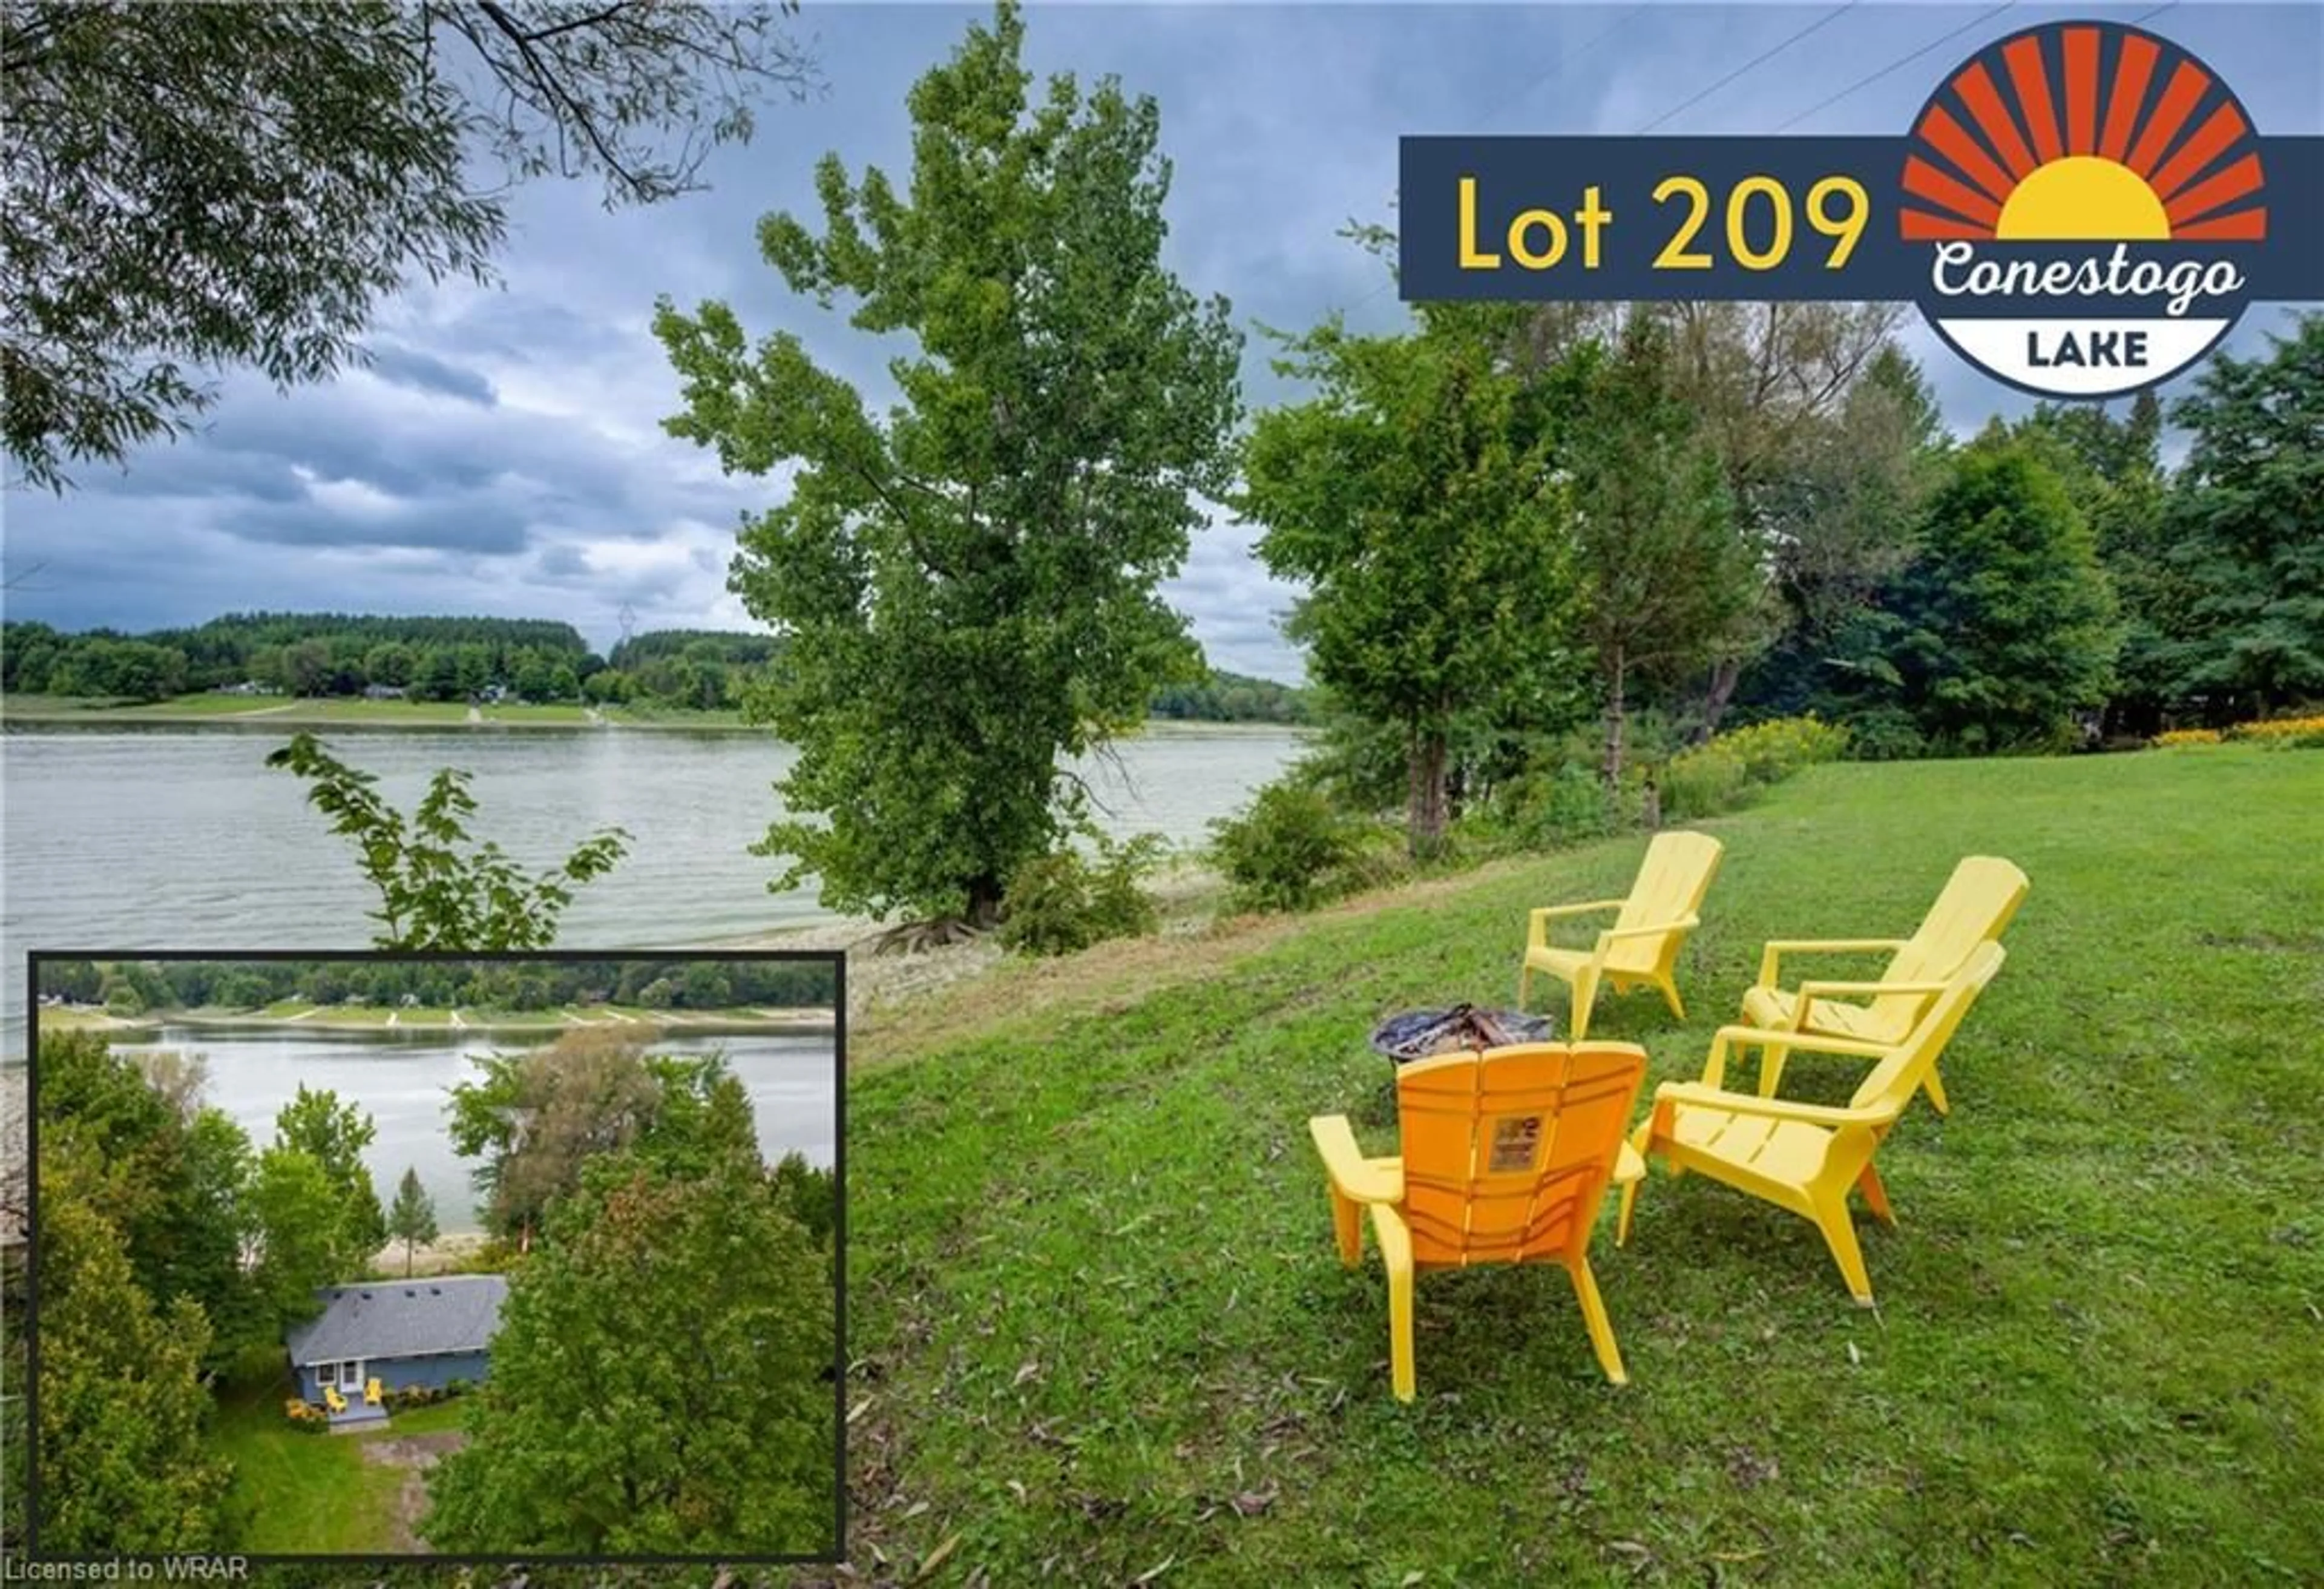 Lakeview for 209 Road 2 South, Conestogo Lake Ontario N0G 1P0